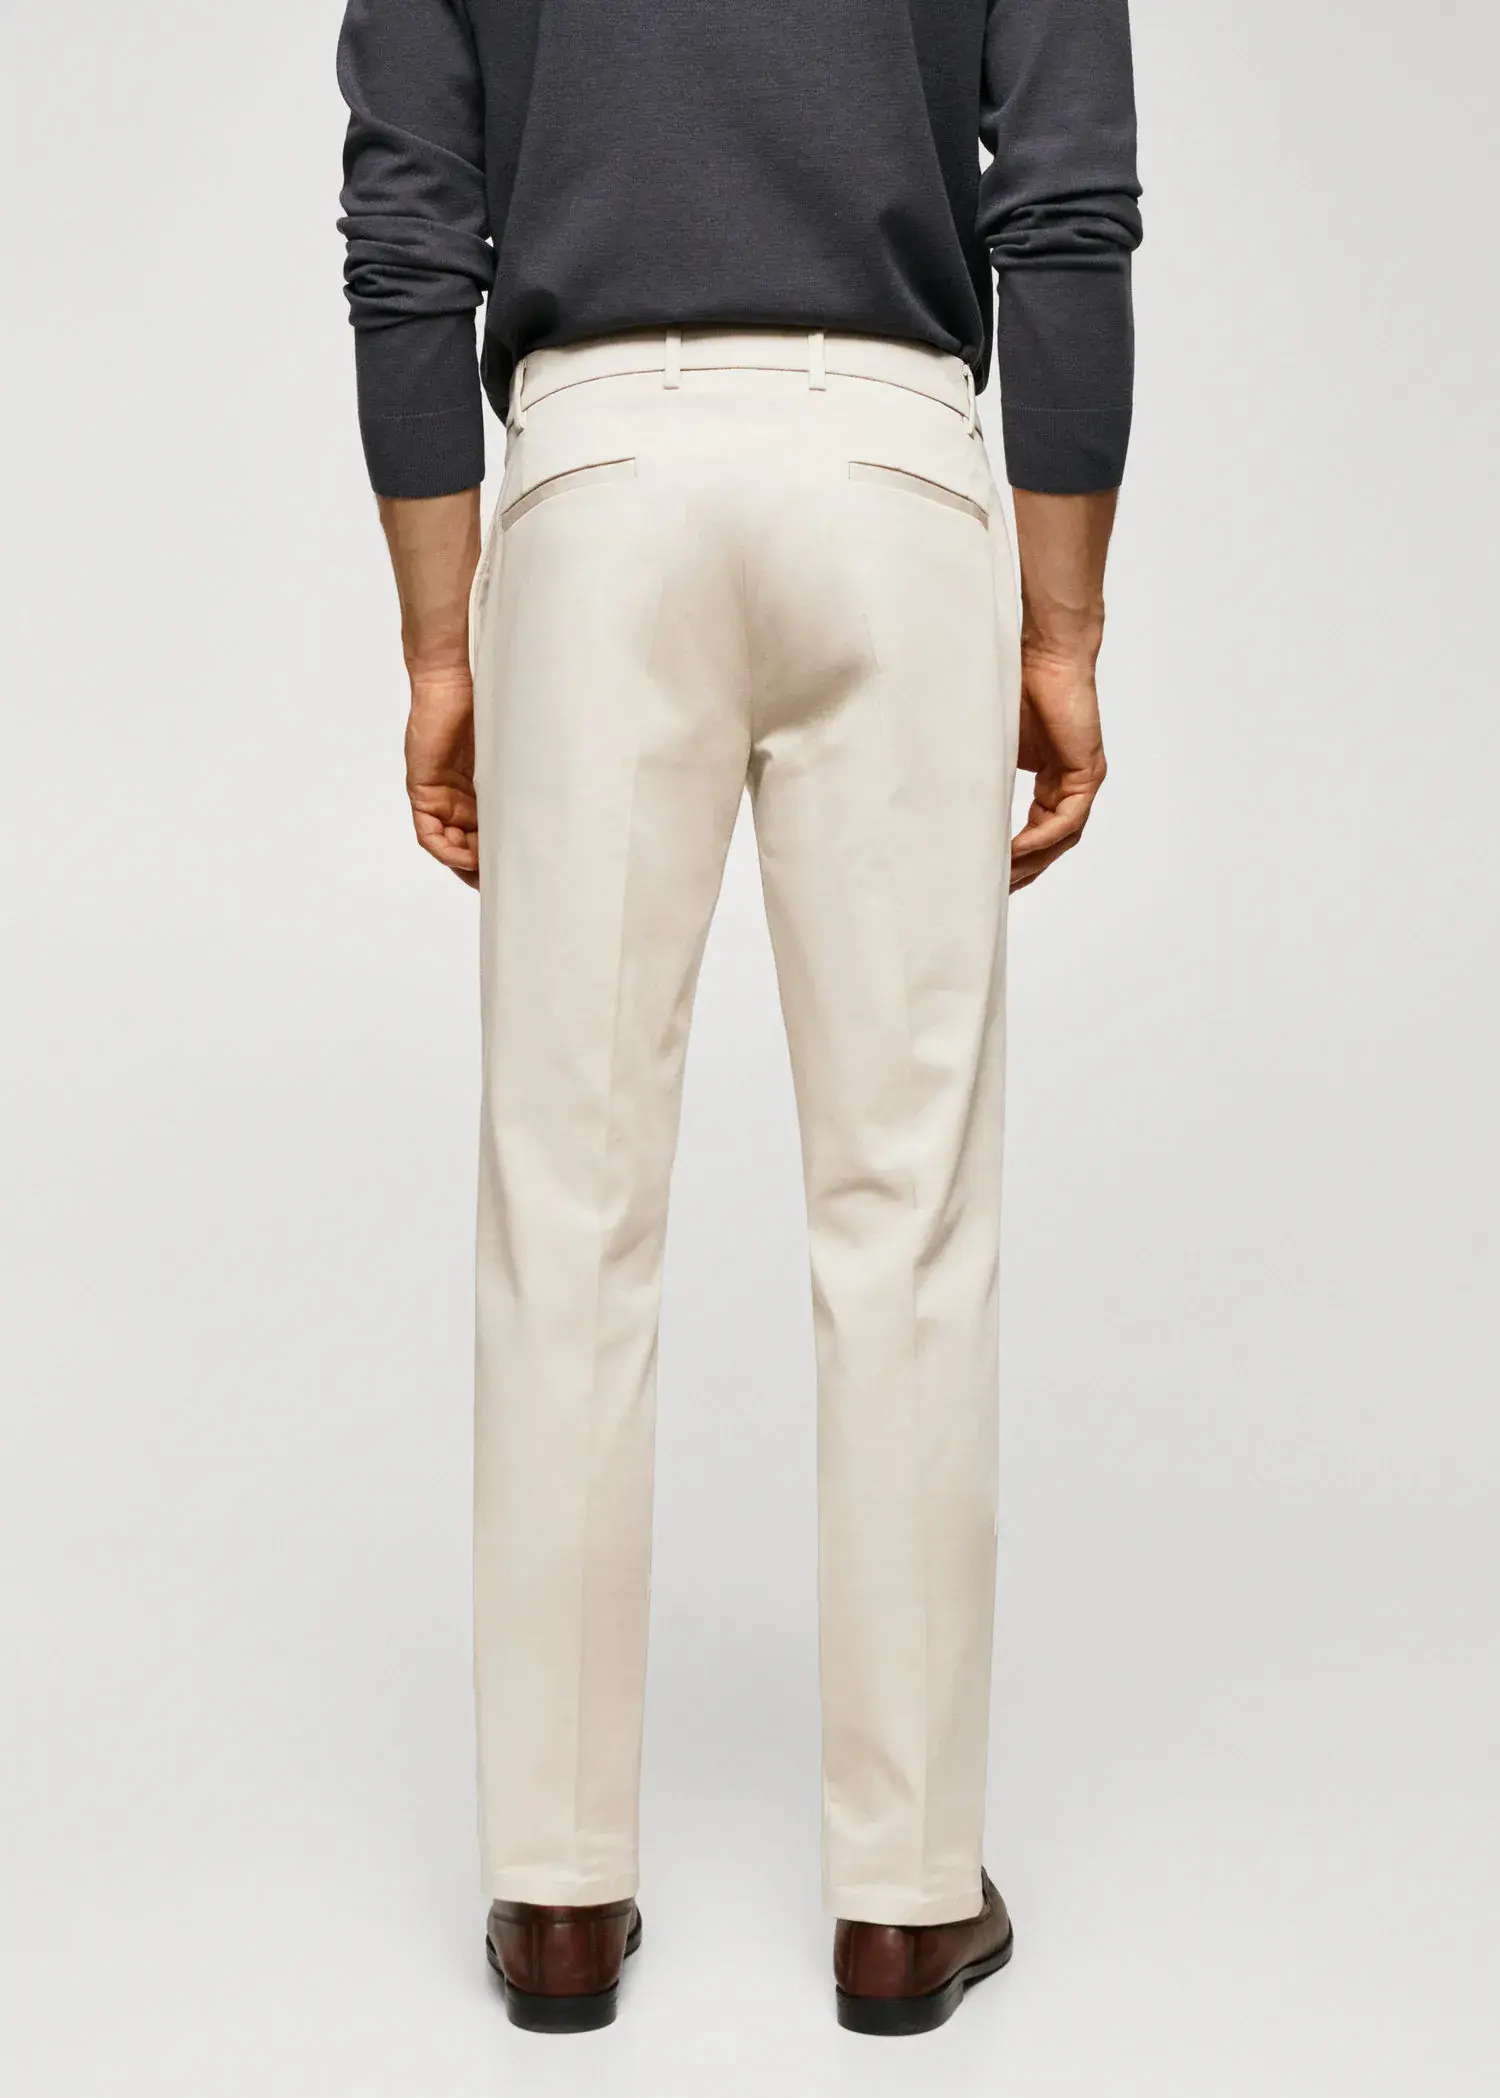 Mango Slim fit chino trousers. a man in a black shirt and white pants. 